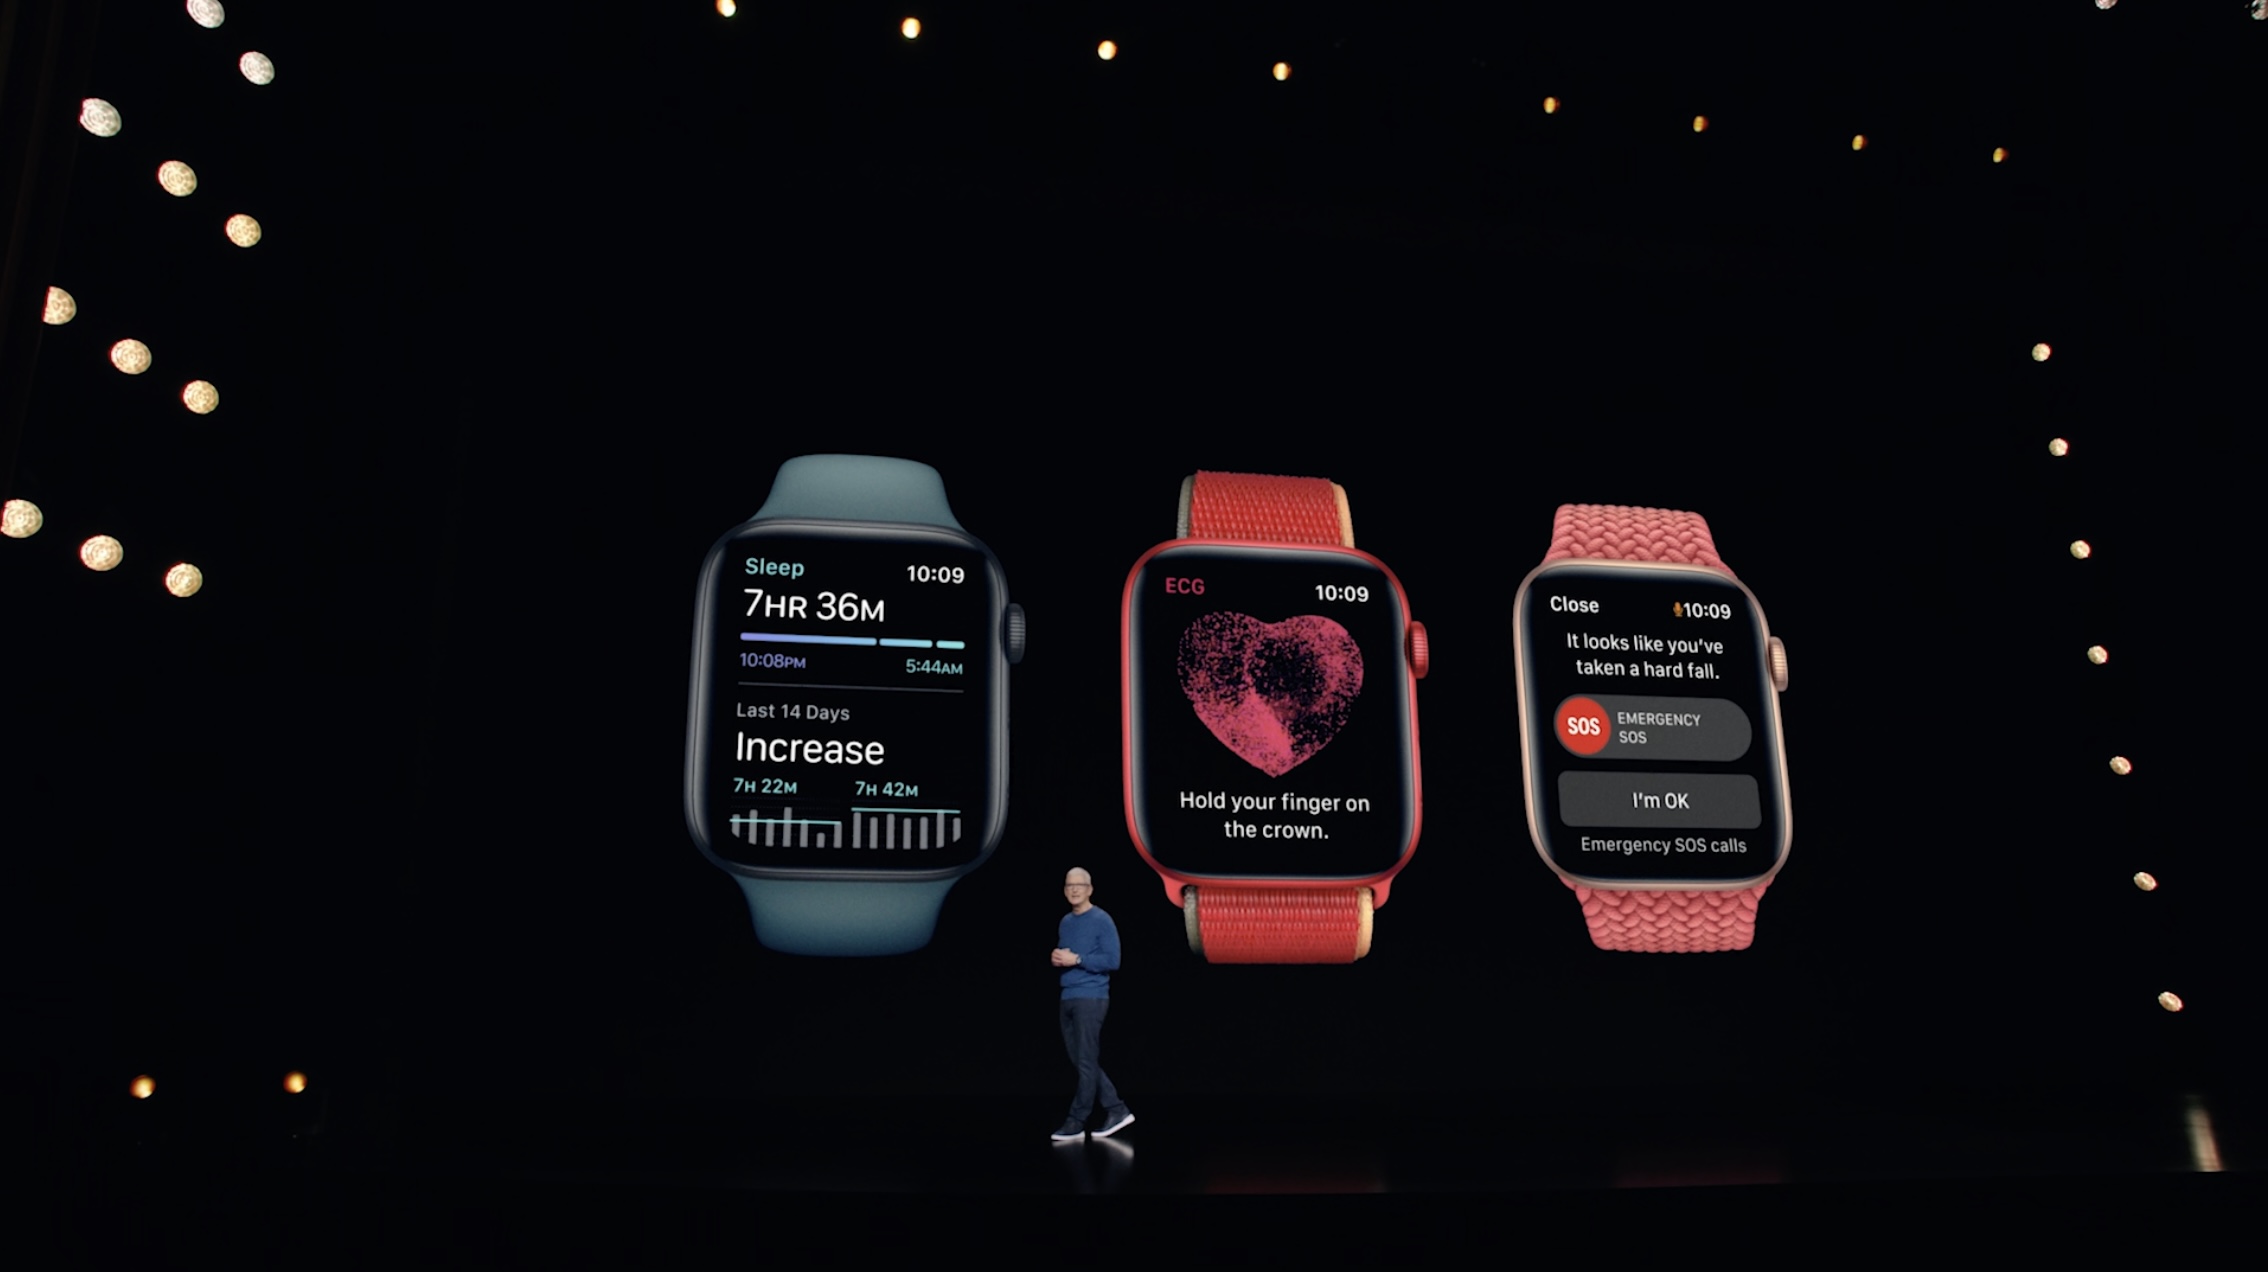 Apple Watch SE features